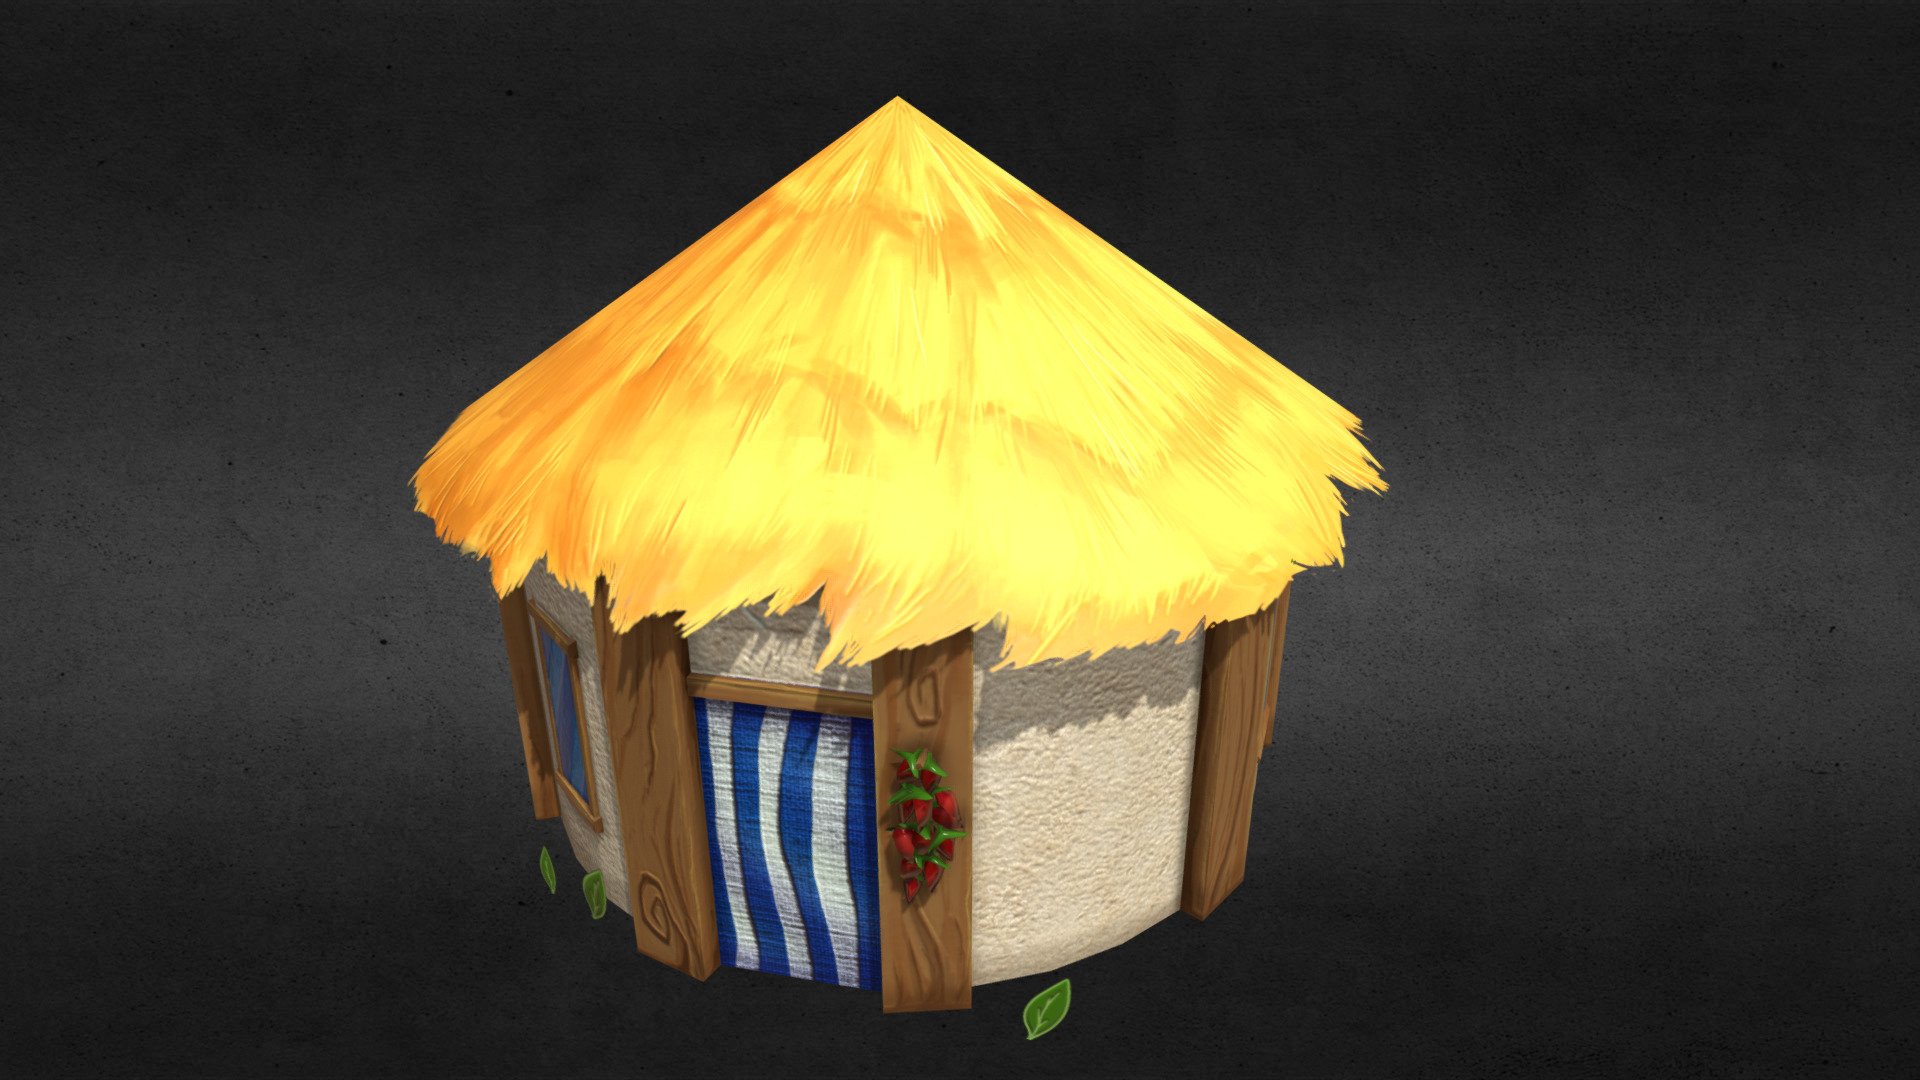 Lowpoly cabin in cartoon style. Tropical stylized cottage ready for game development. Hand painted crib.

Asset includes textures of color, bump, alpha transparency and normal map.

Hut consist of 62 polygons, triangles and quads.
Whole asset is 534 polygons - Low poly stylized tribal tropical hut - Buy Royalty Free 3D model by Scritta 3d model